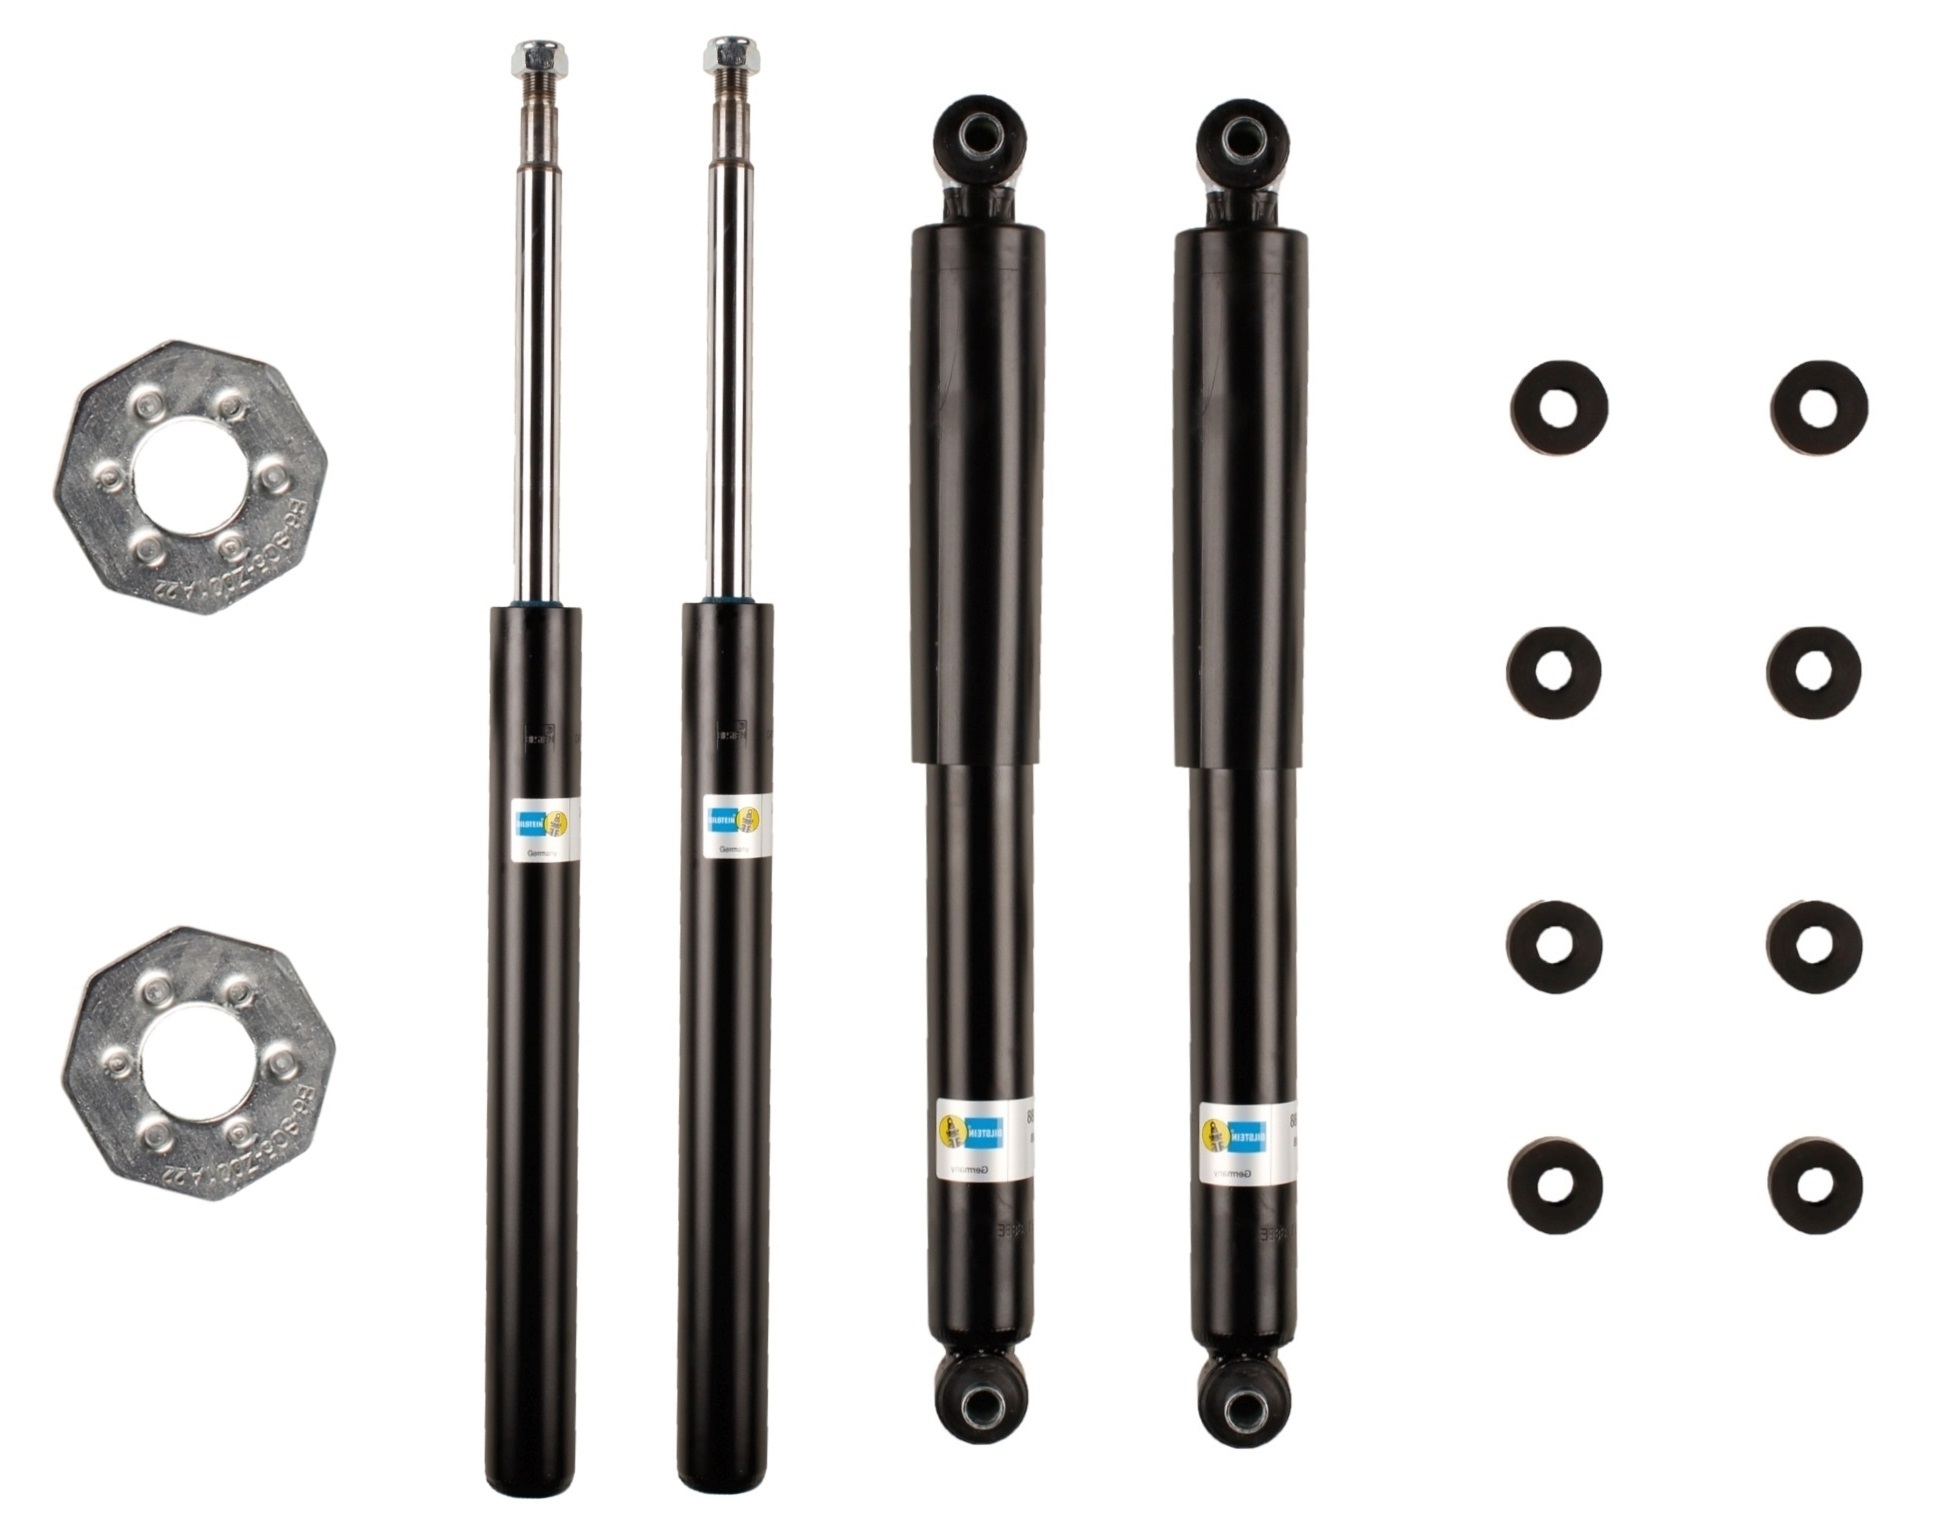 4x Bilstein B4 Front & Rear Shock Absorbers For VOLVO 740 744 86-92 2.3 Turb 21-030543, 19-019888